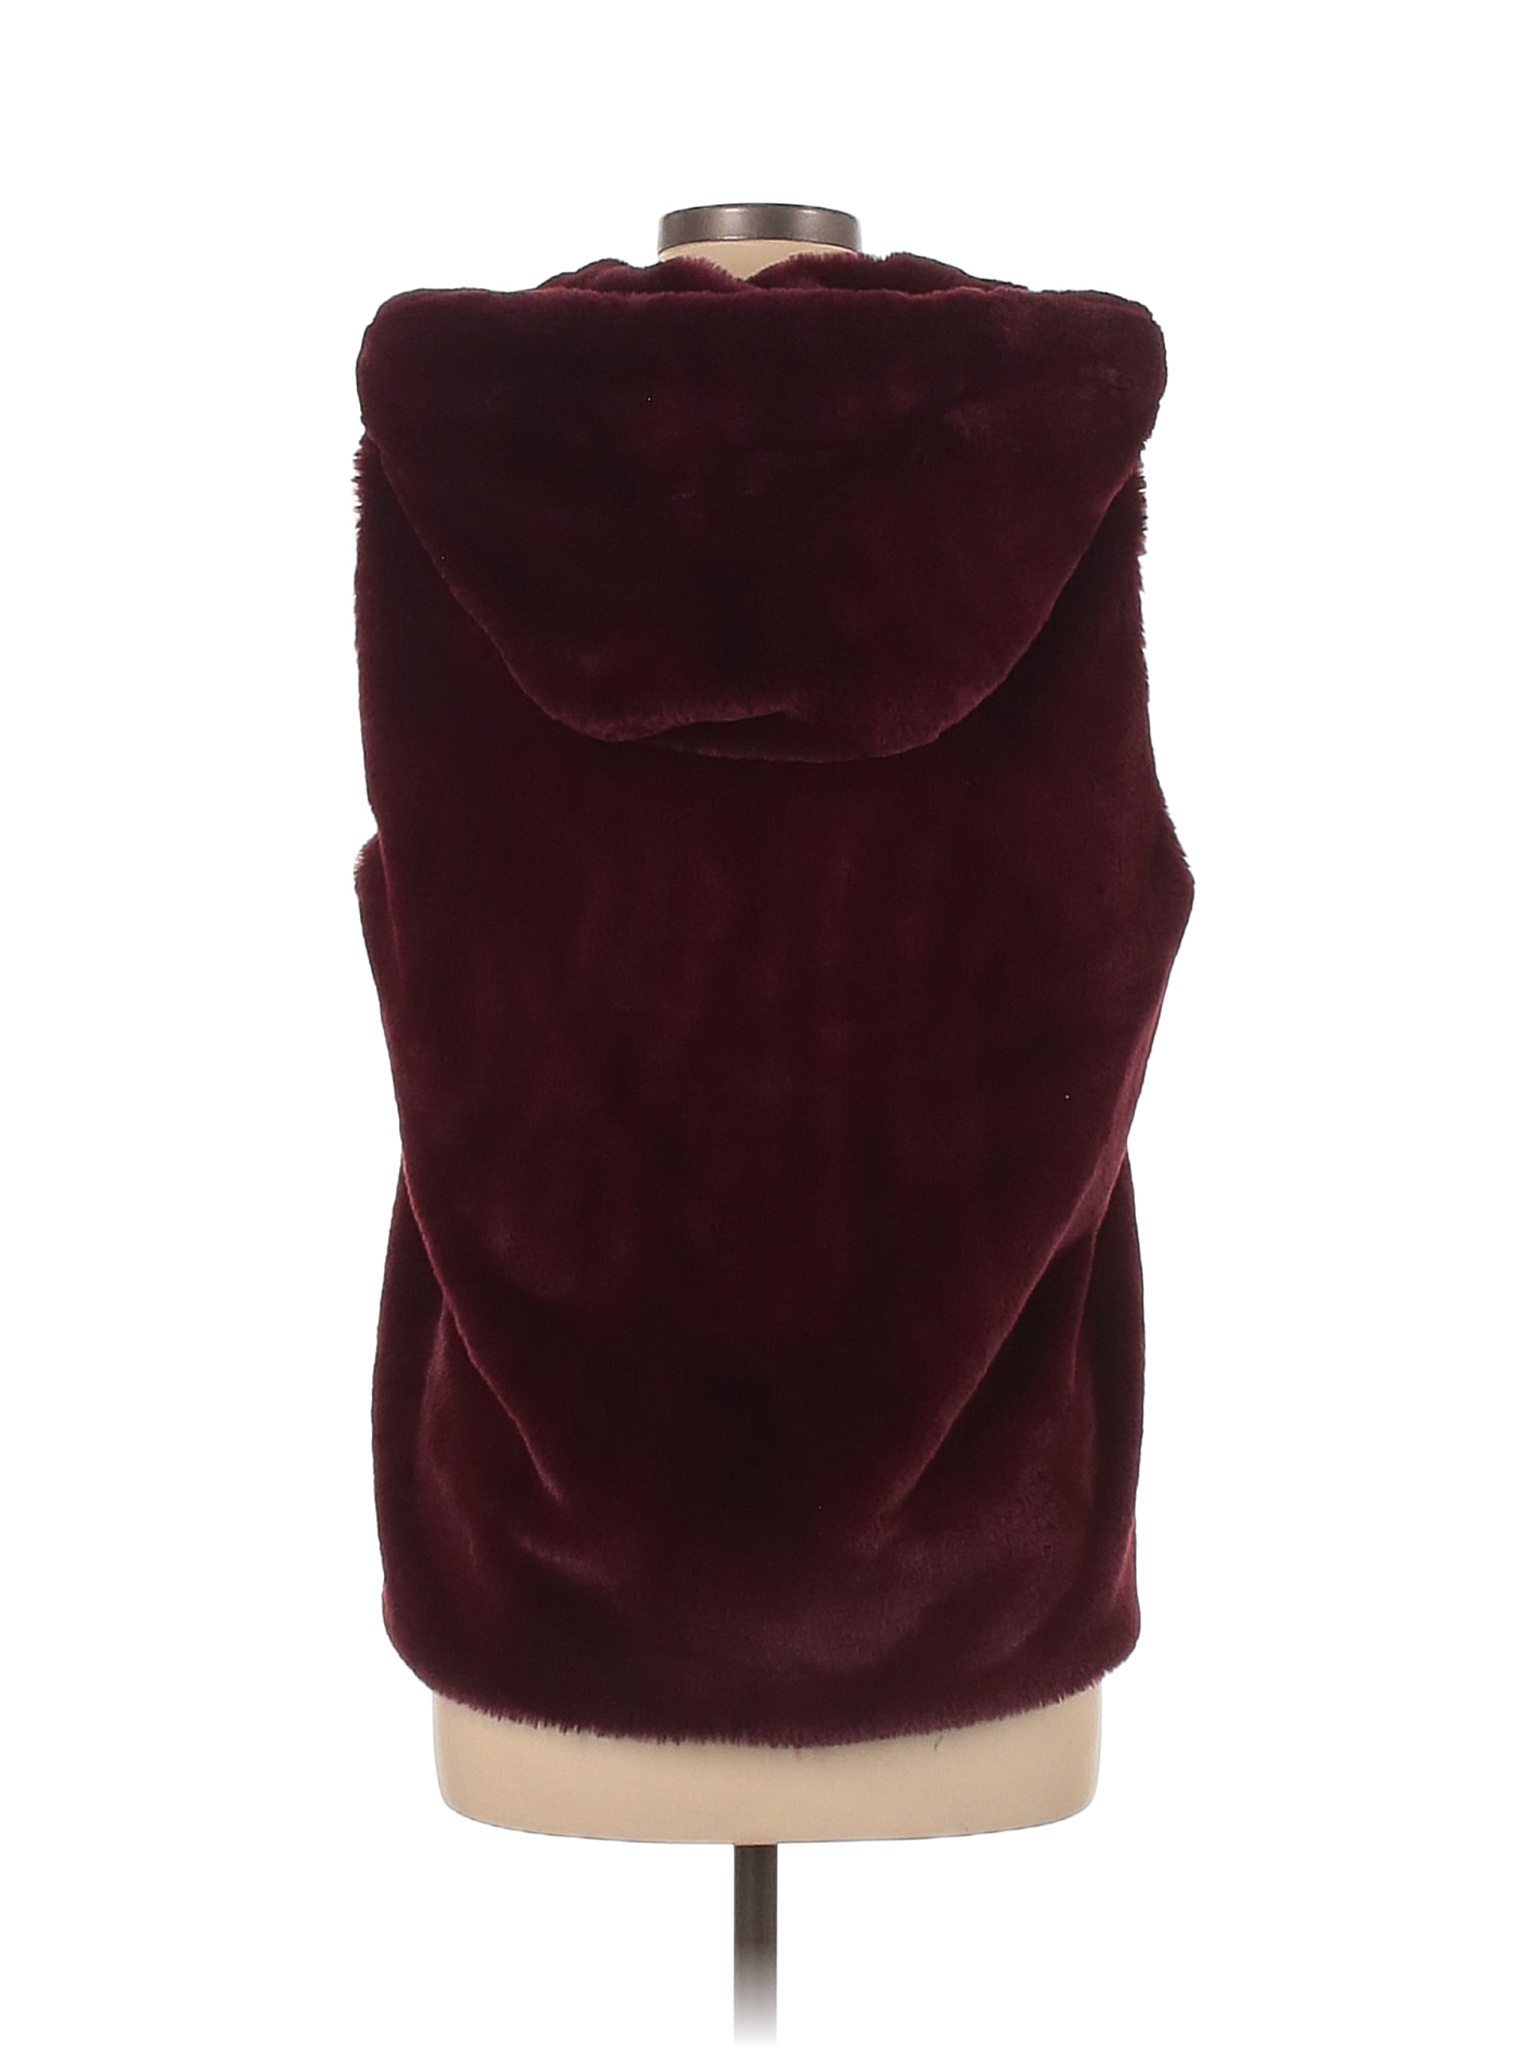 Simply Vera Vera Wang 100% Polyester Solid Burgundy Faux Fur Vest Size M -  65% off